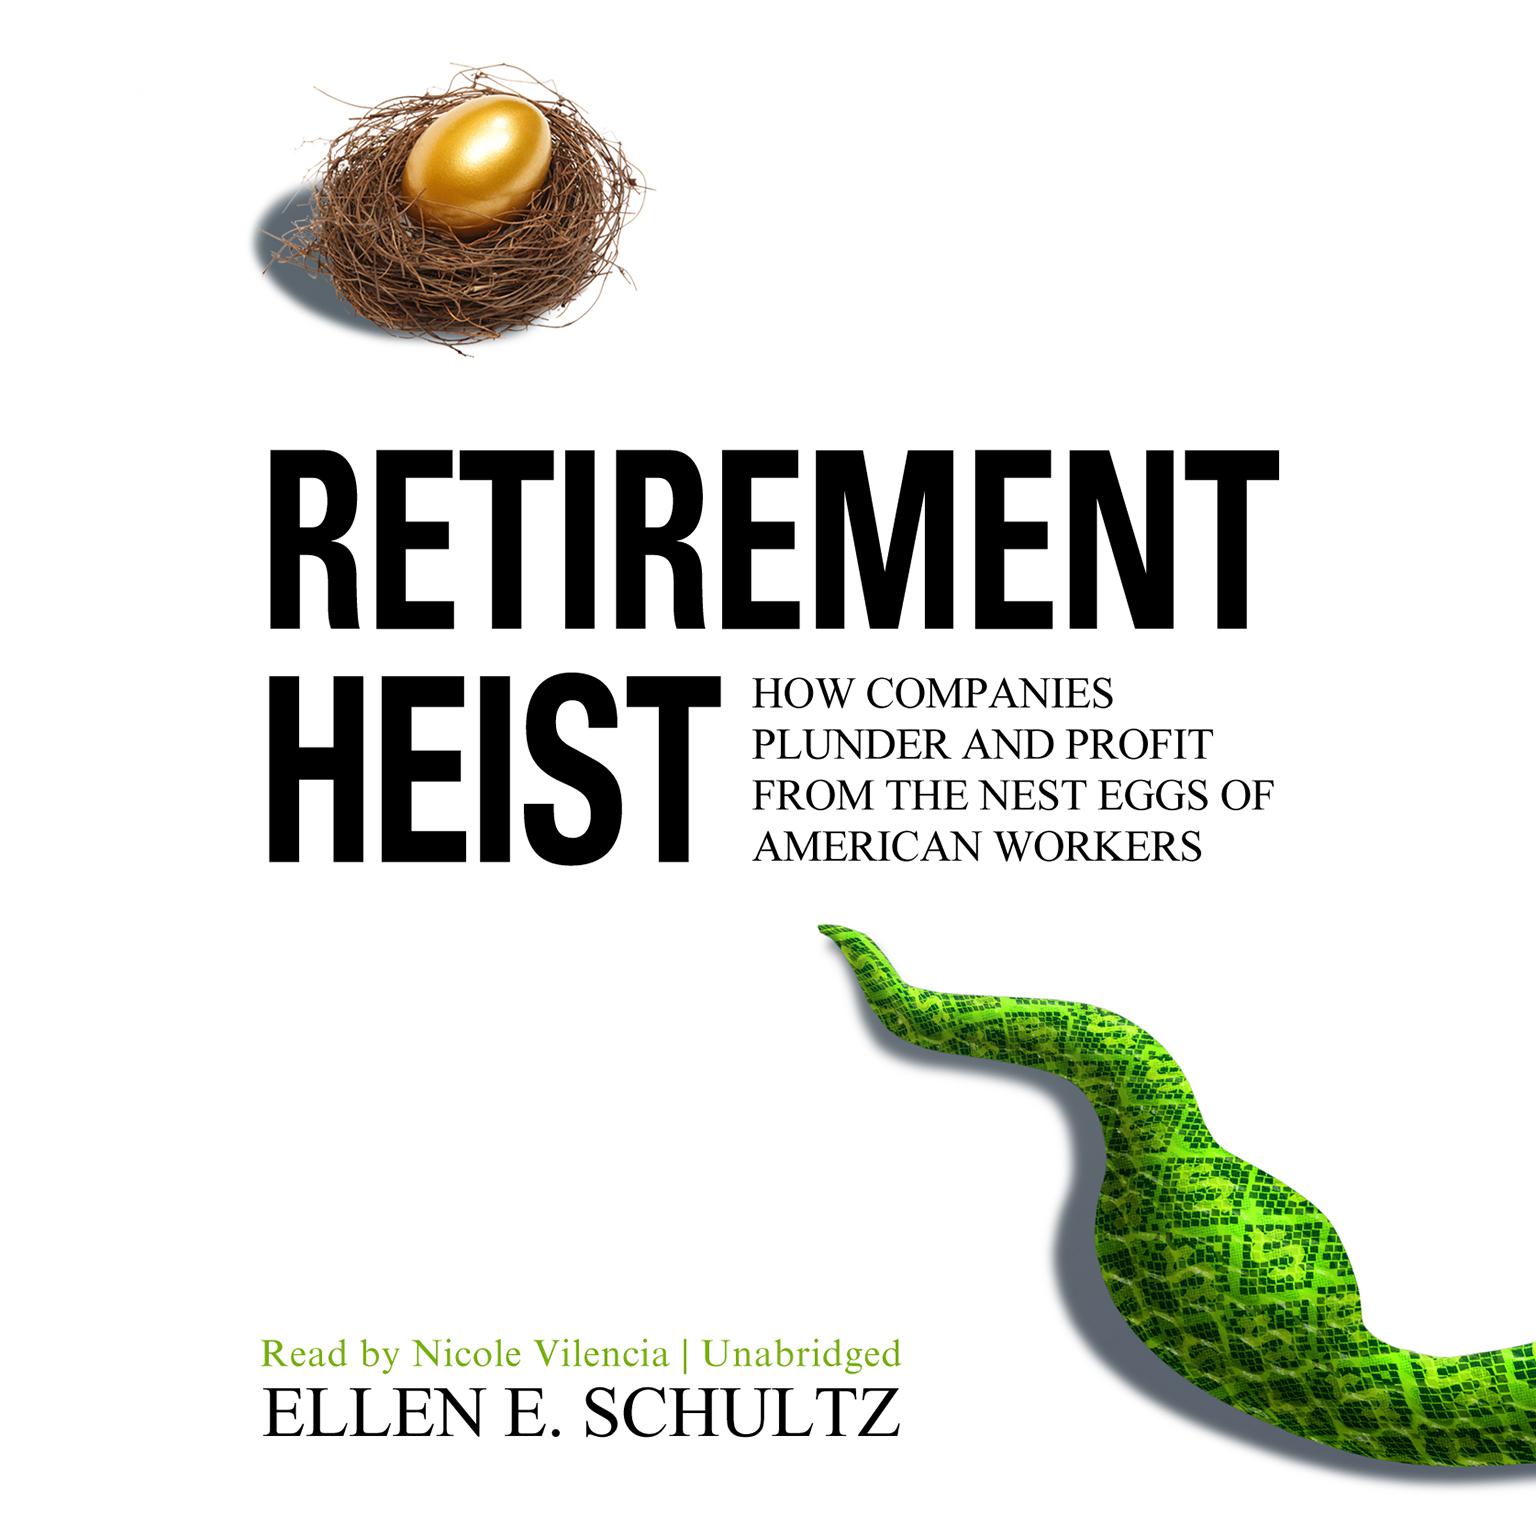 Retirement Heist: How Companies Plunder and Profit from the Nest Eggs of American Workers Audiobook, by Ellen E. Schultz